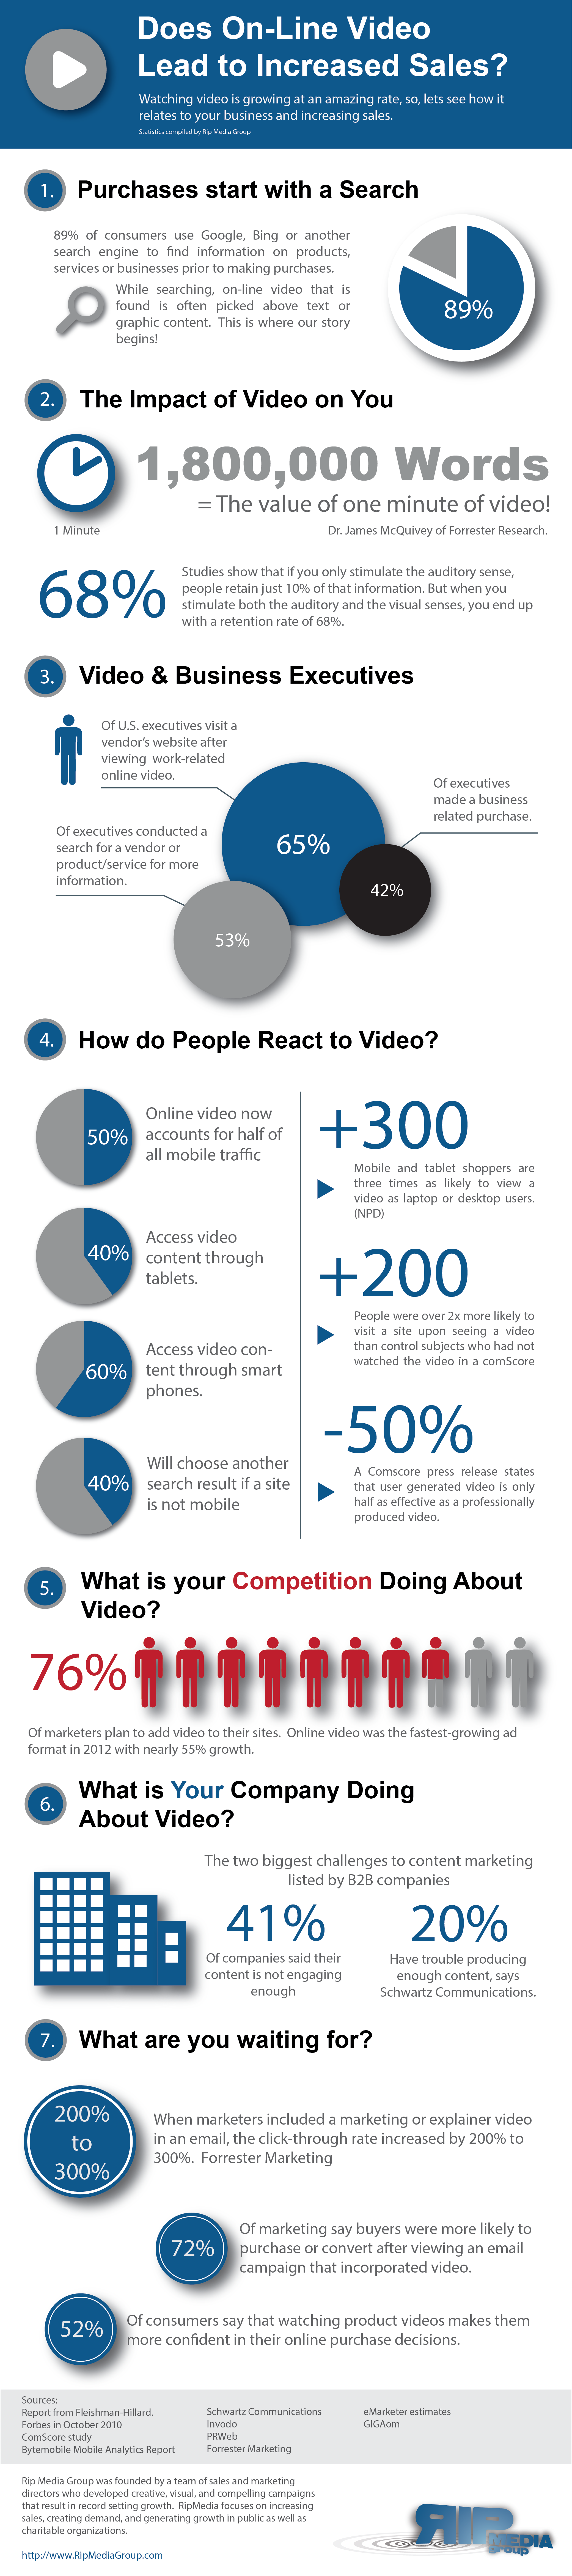 Does an online video will enhance the company sales in reality?